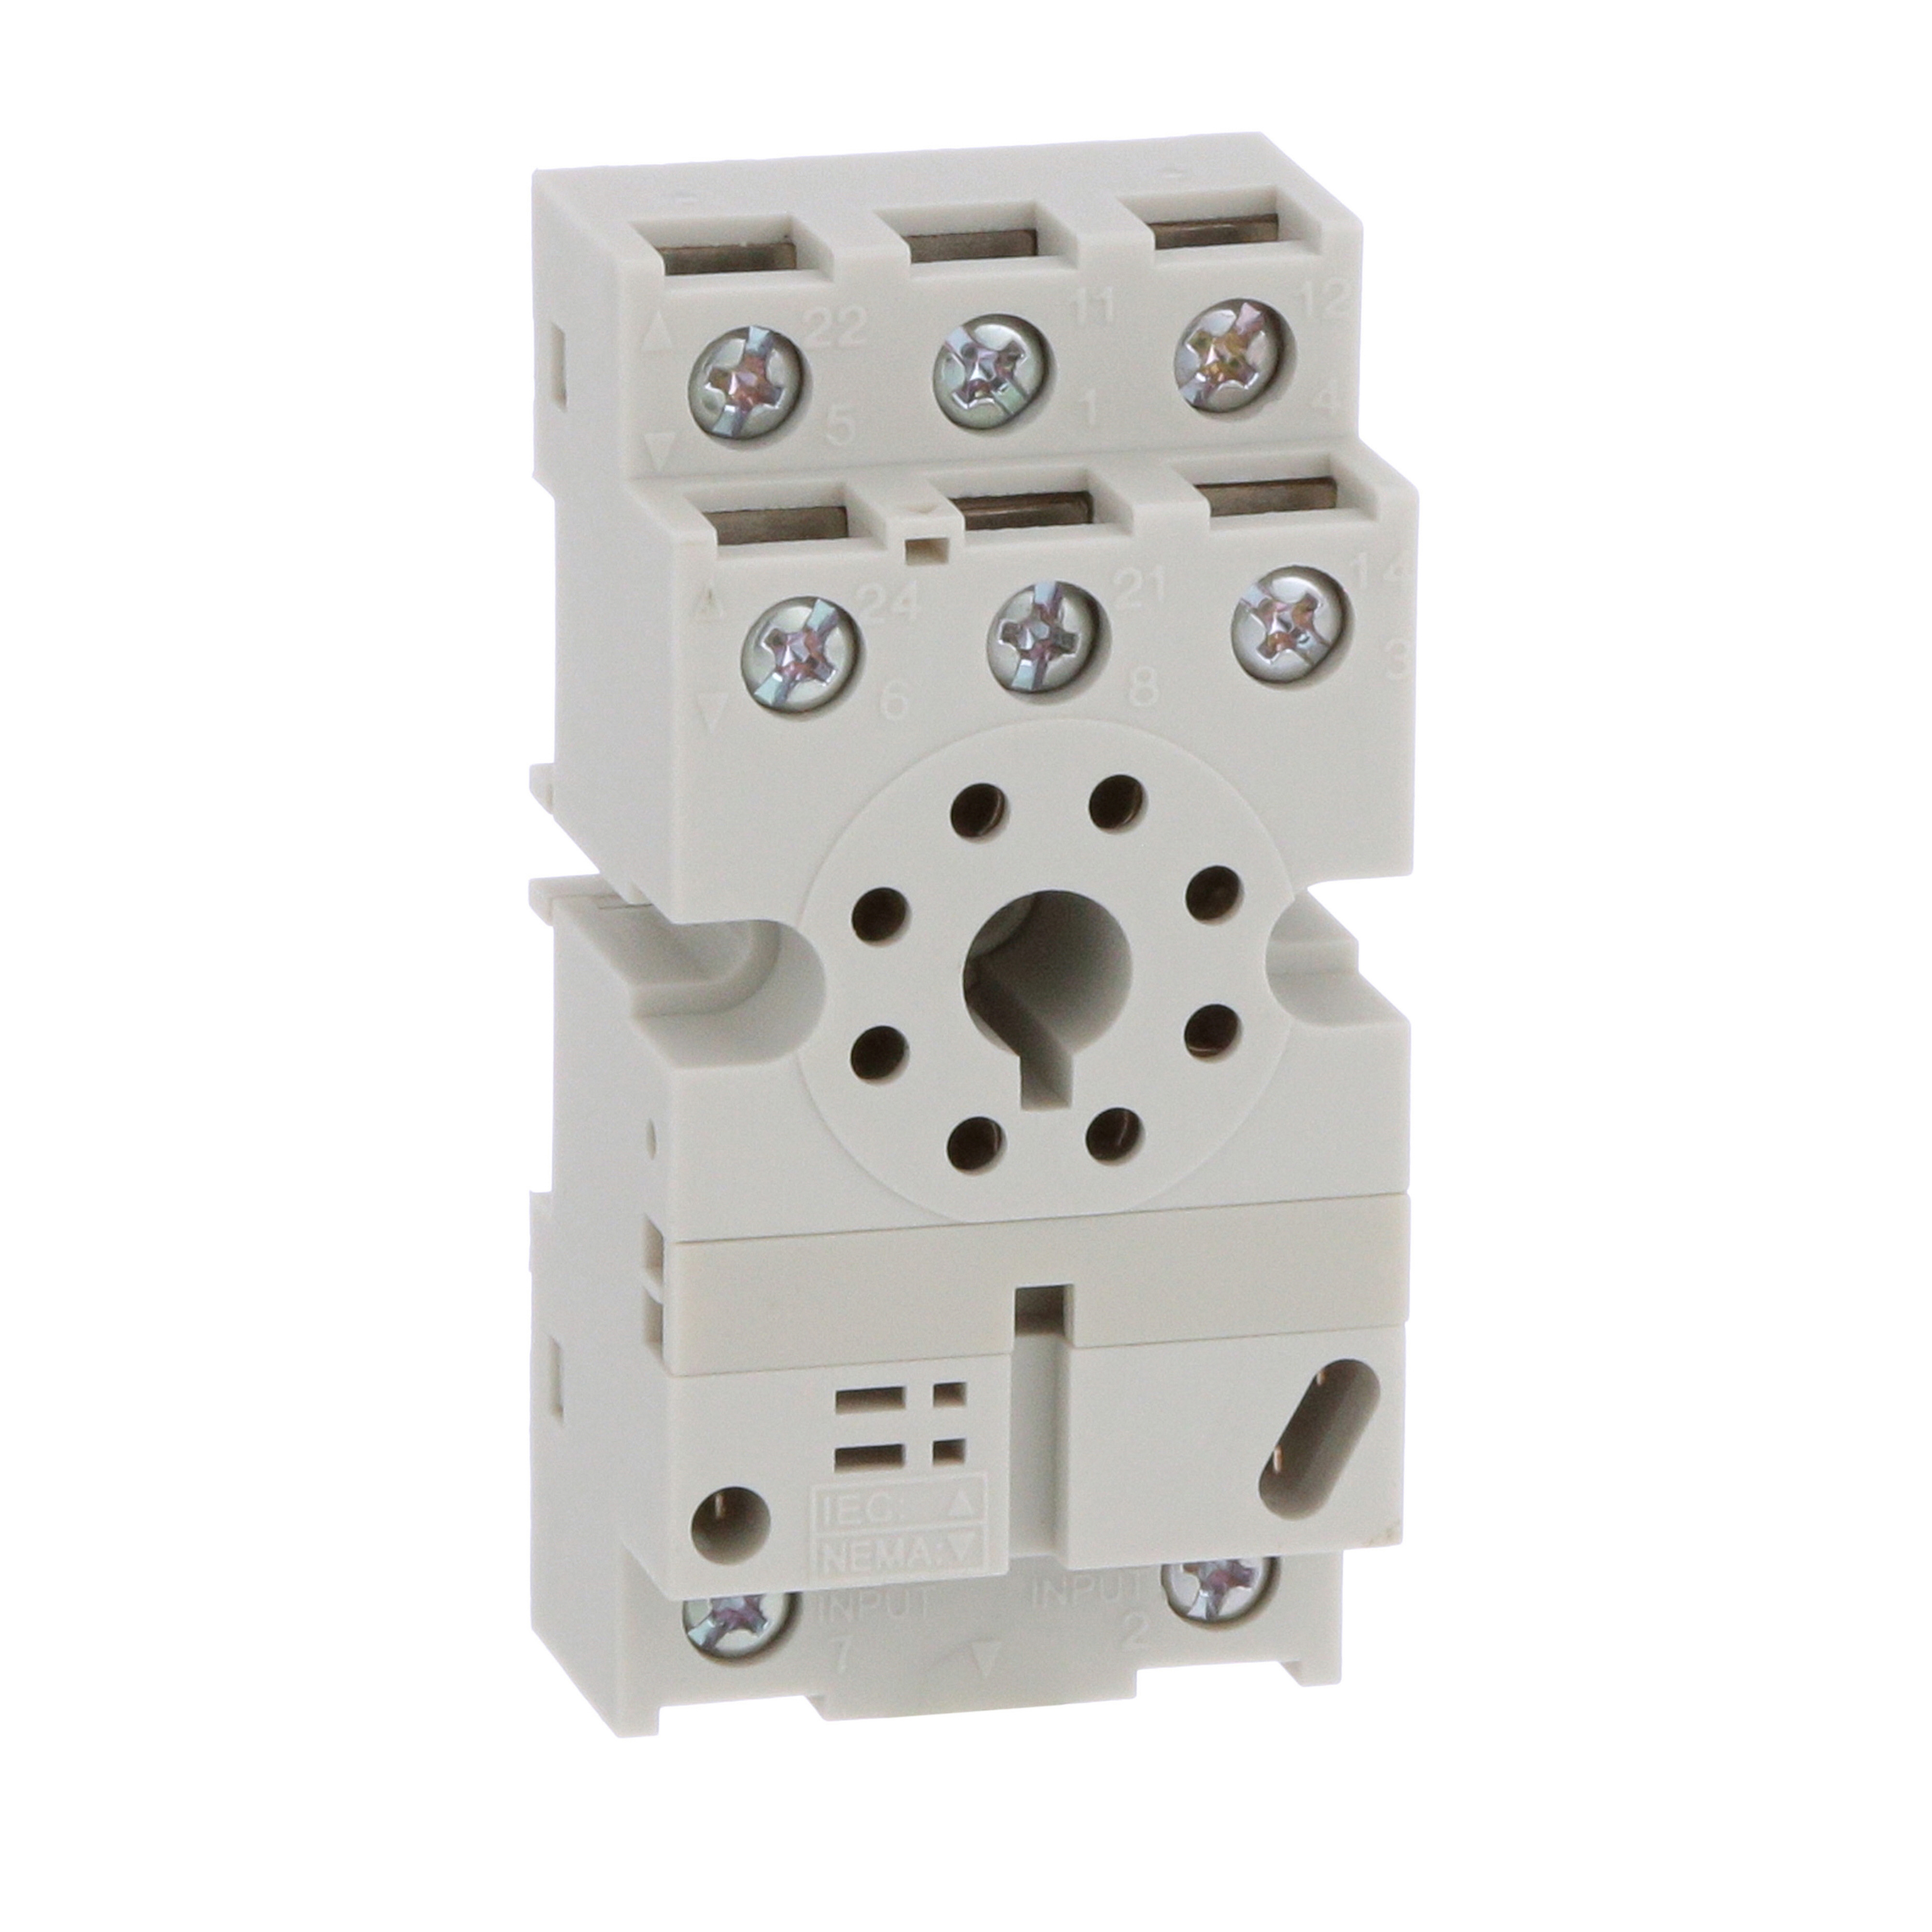 Plug in relay, Type N, relay socket, 8 tubular pin, double tier, for 8510KP relays and 9050JCK timers, bulk packaged